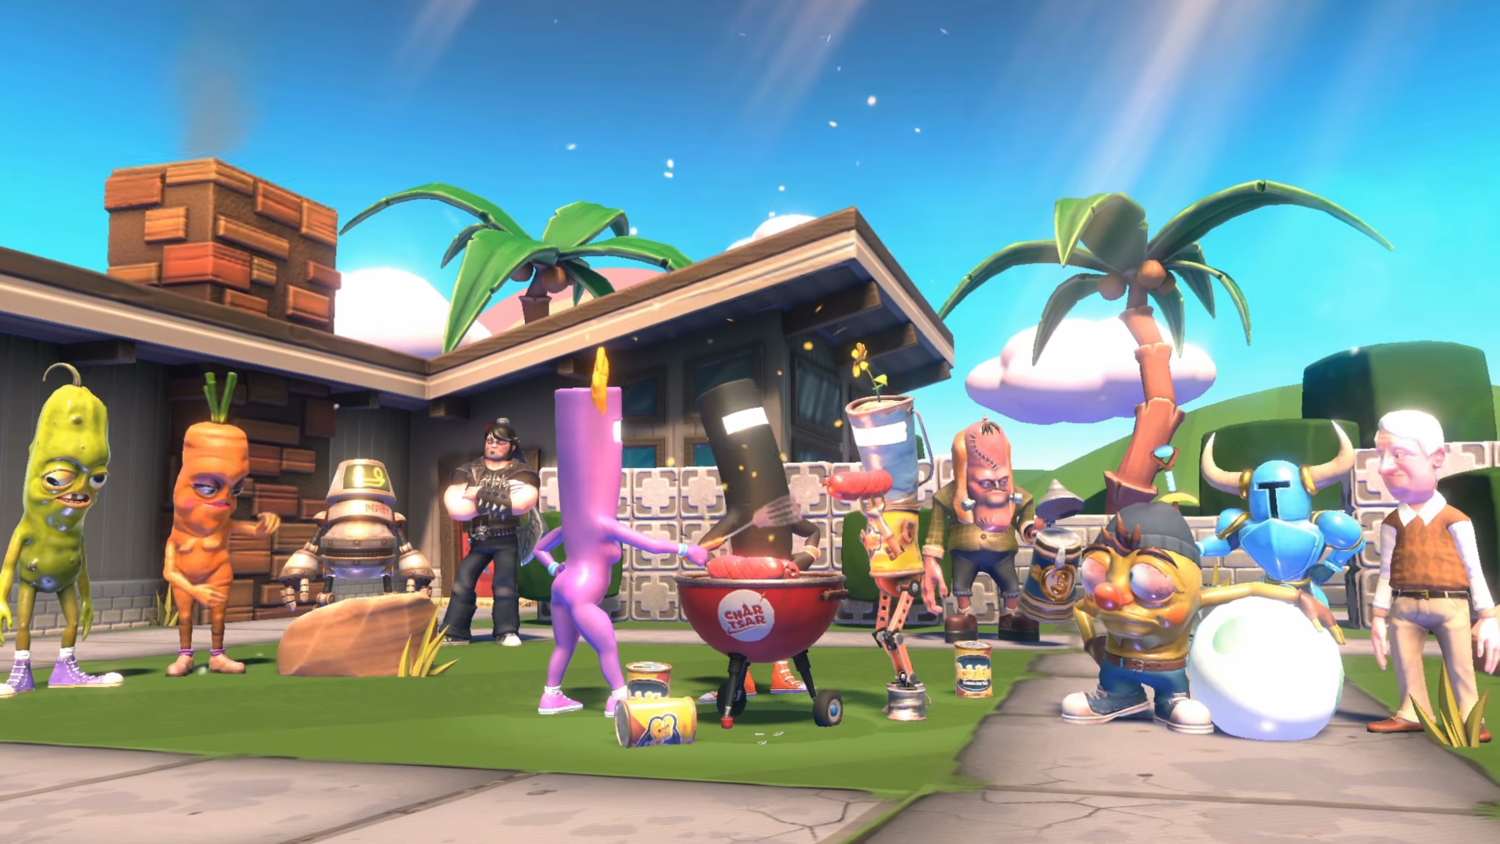  Shovel Knight (playable) joining a BBQ with the Runner3 crew. 